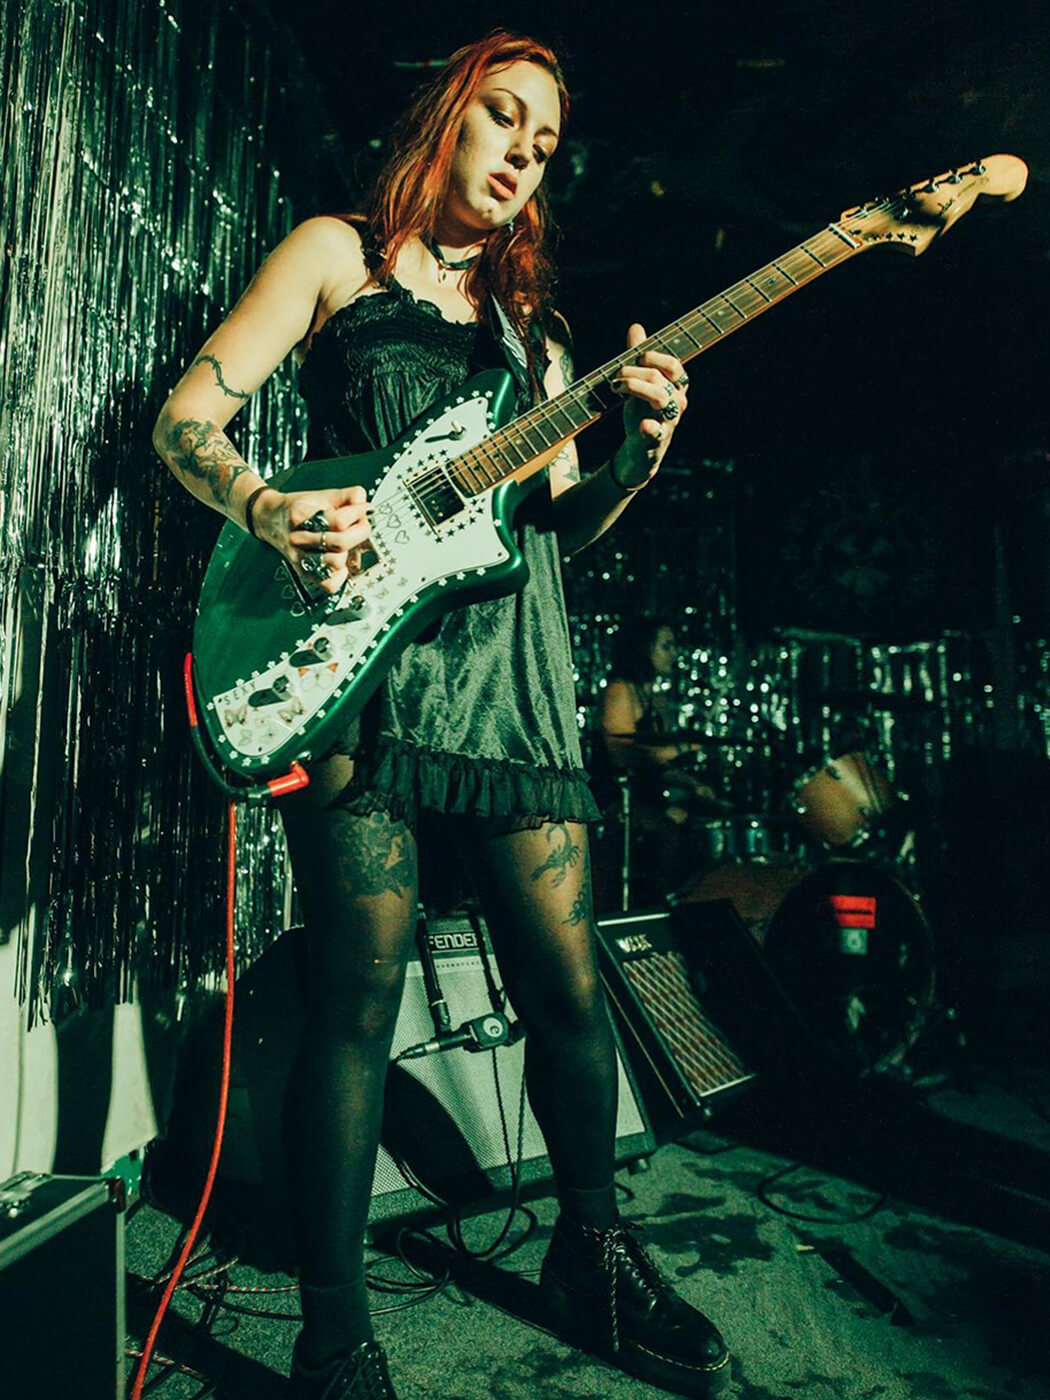 Scarlett McKahey playing her Fender Meteora, from Teen Jesus and the Jean Teasers Official Facebook